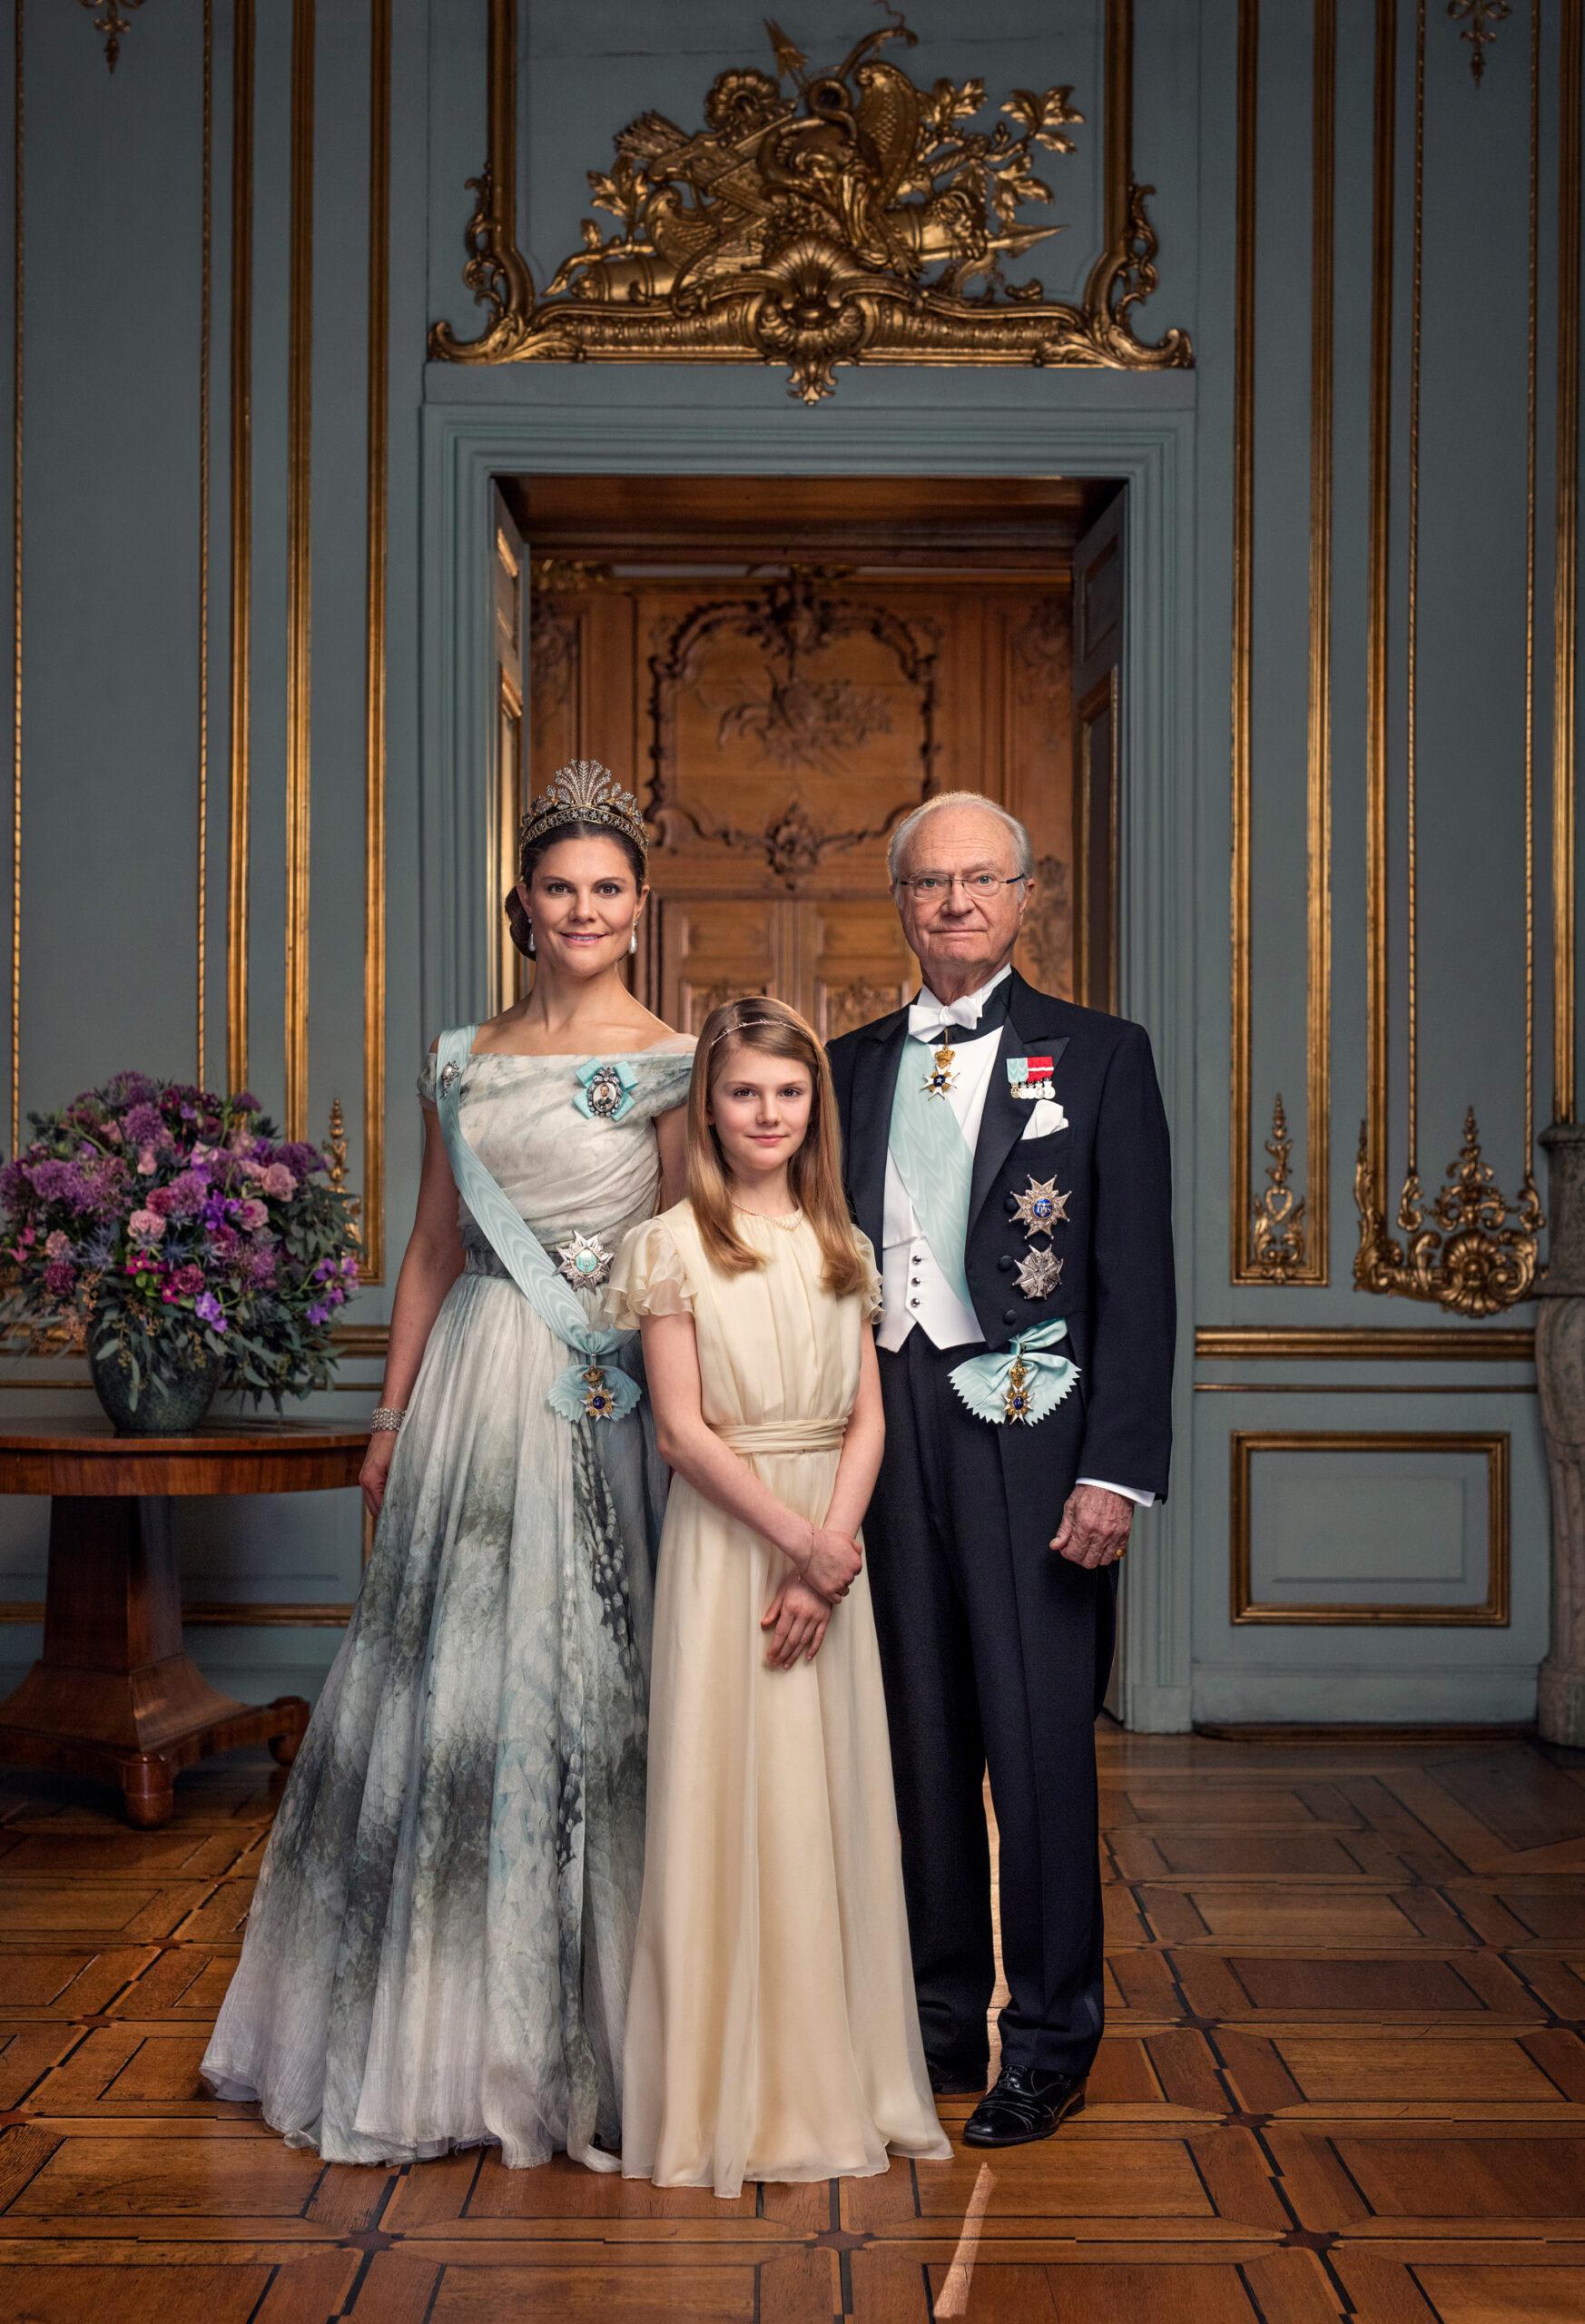 A portrait of Crown Princess Victoria, King Carl XVI Gustaf and Princess Estelle in front of a well-decorated wall and door. 